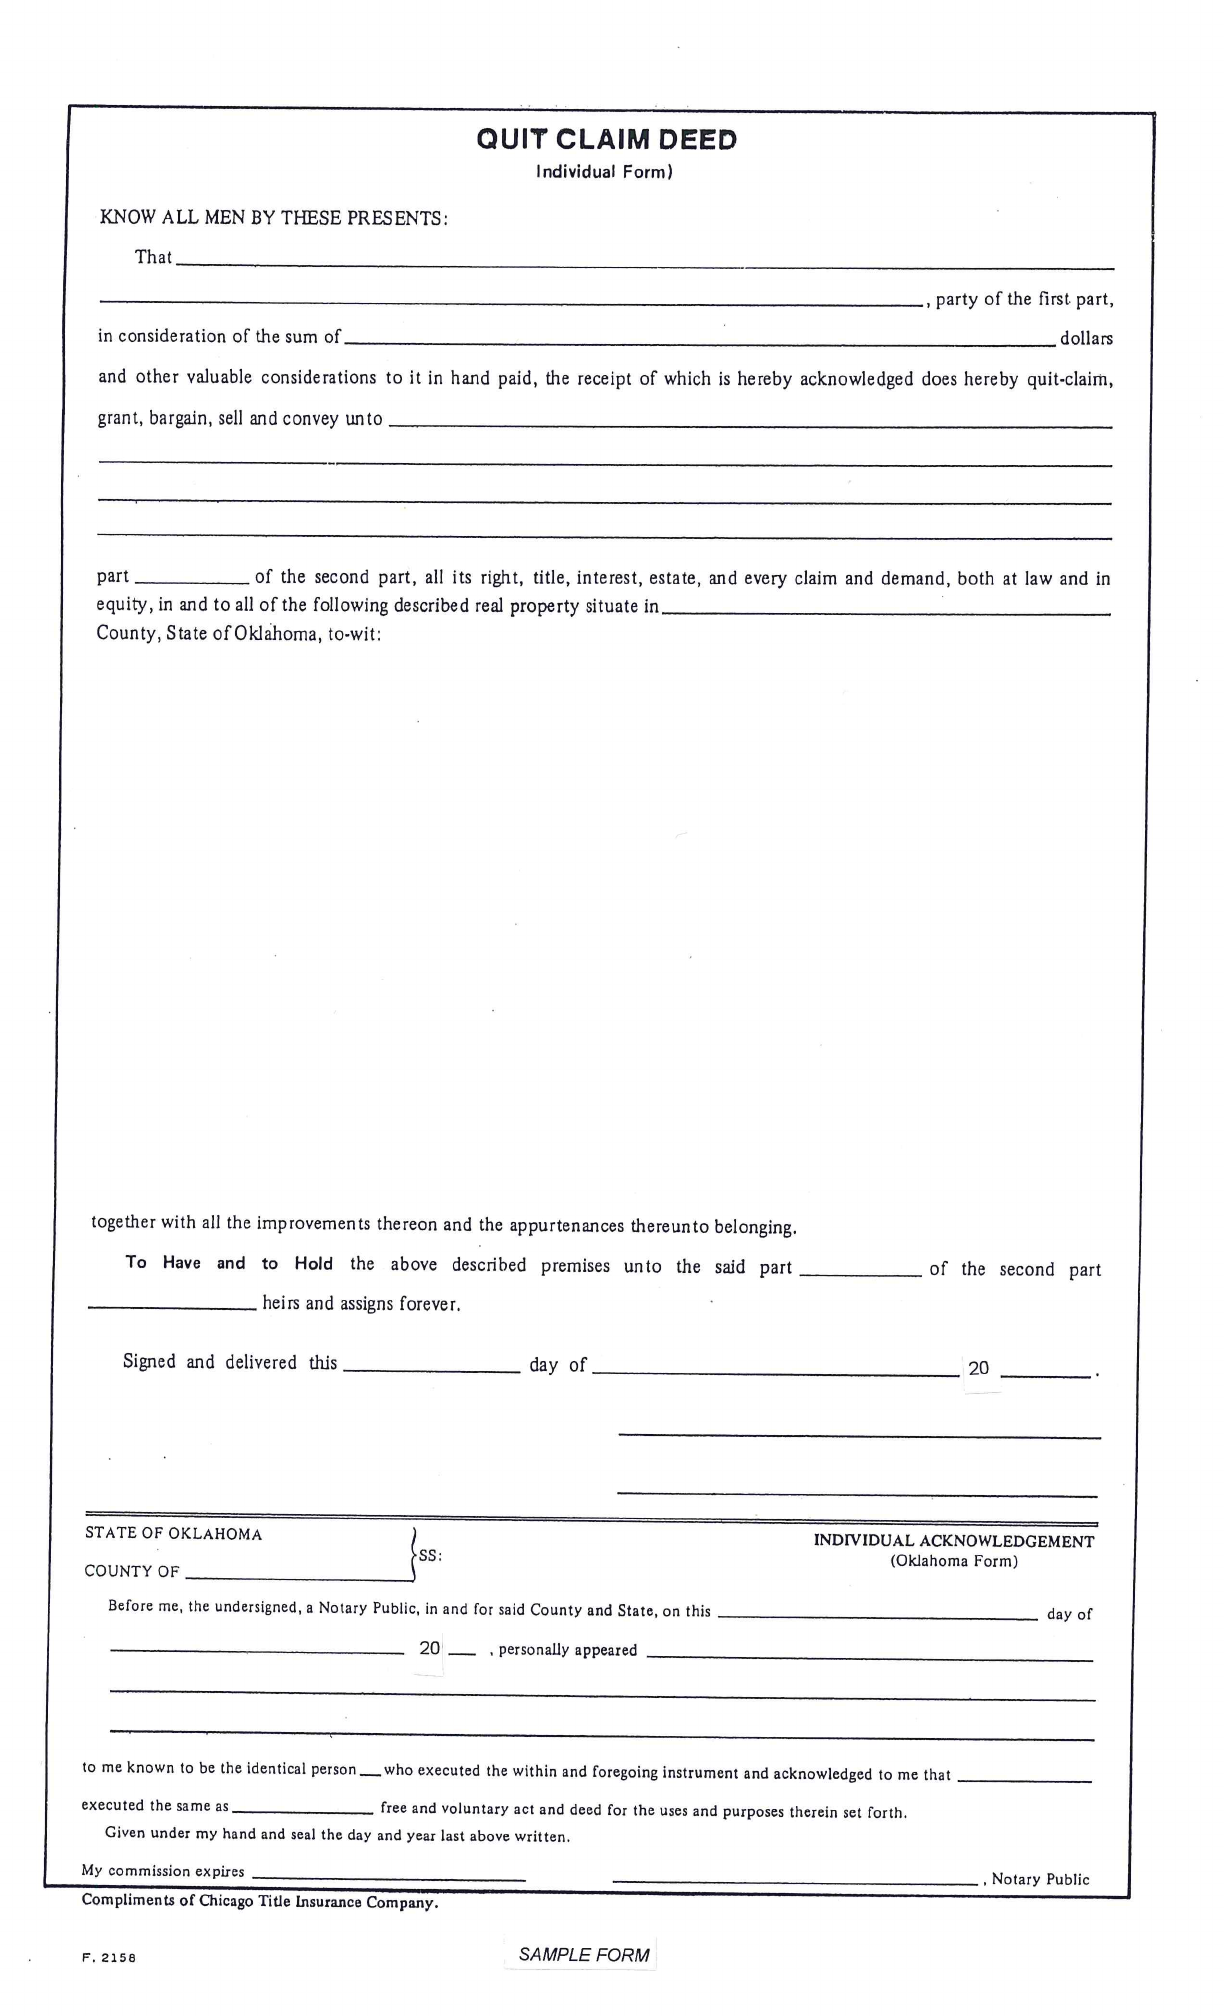 example of a quit claim deed completed